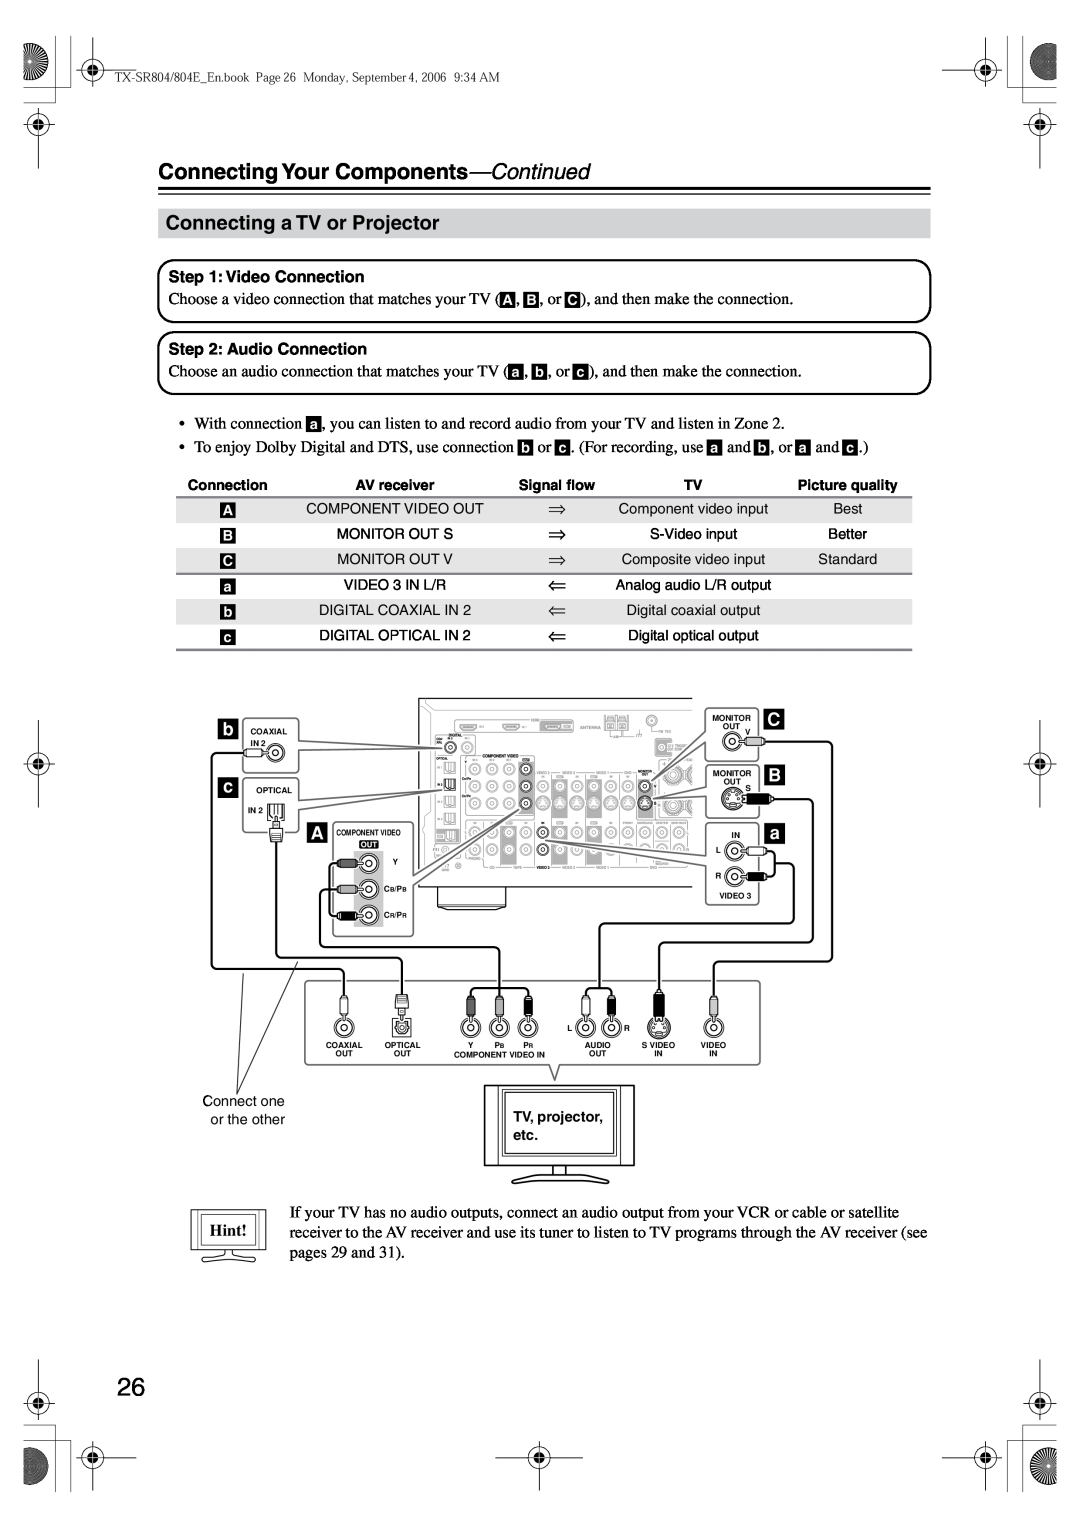 Onkyo TX-SR804E instruction manual Connecting a TV or Projector, C B a, Connecting Your Components—Continued, Hint 